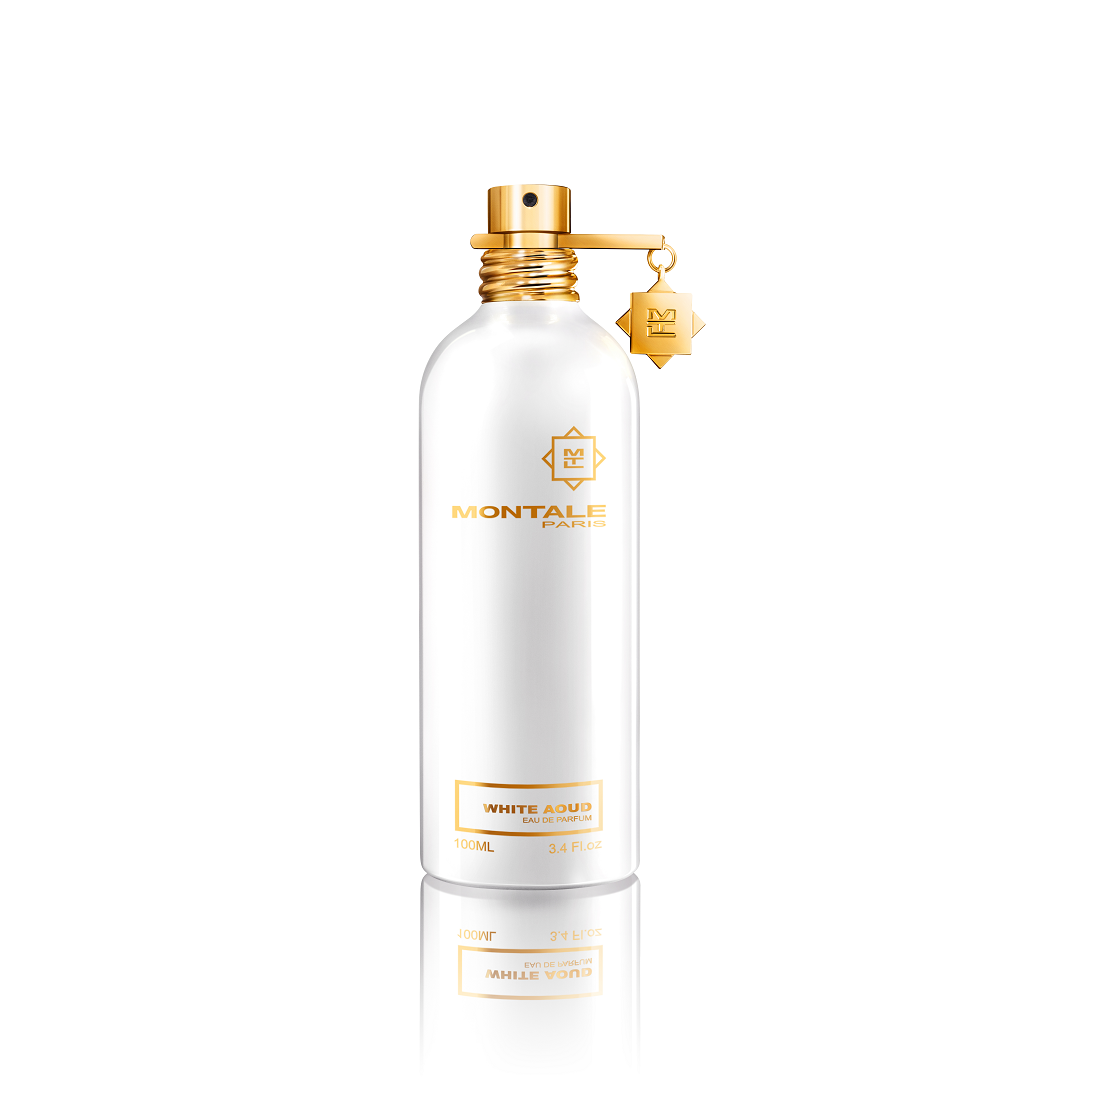 MONTALE - WHITE AOUD